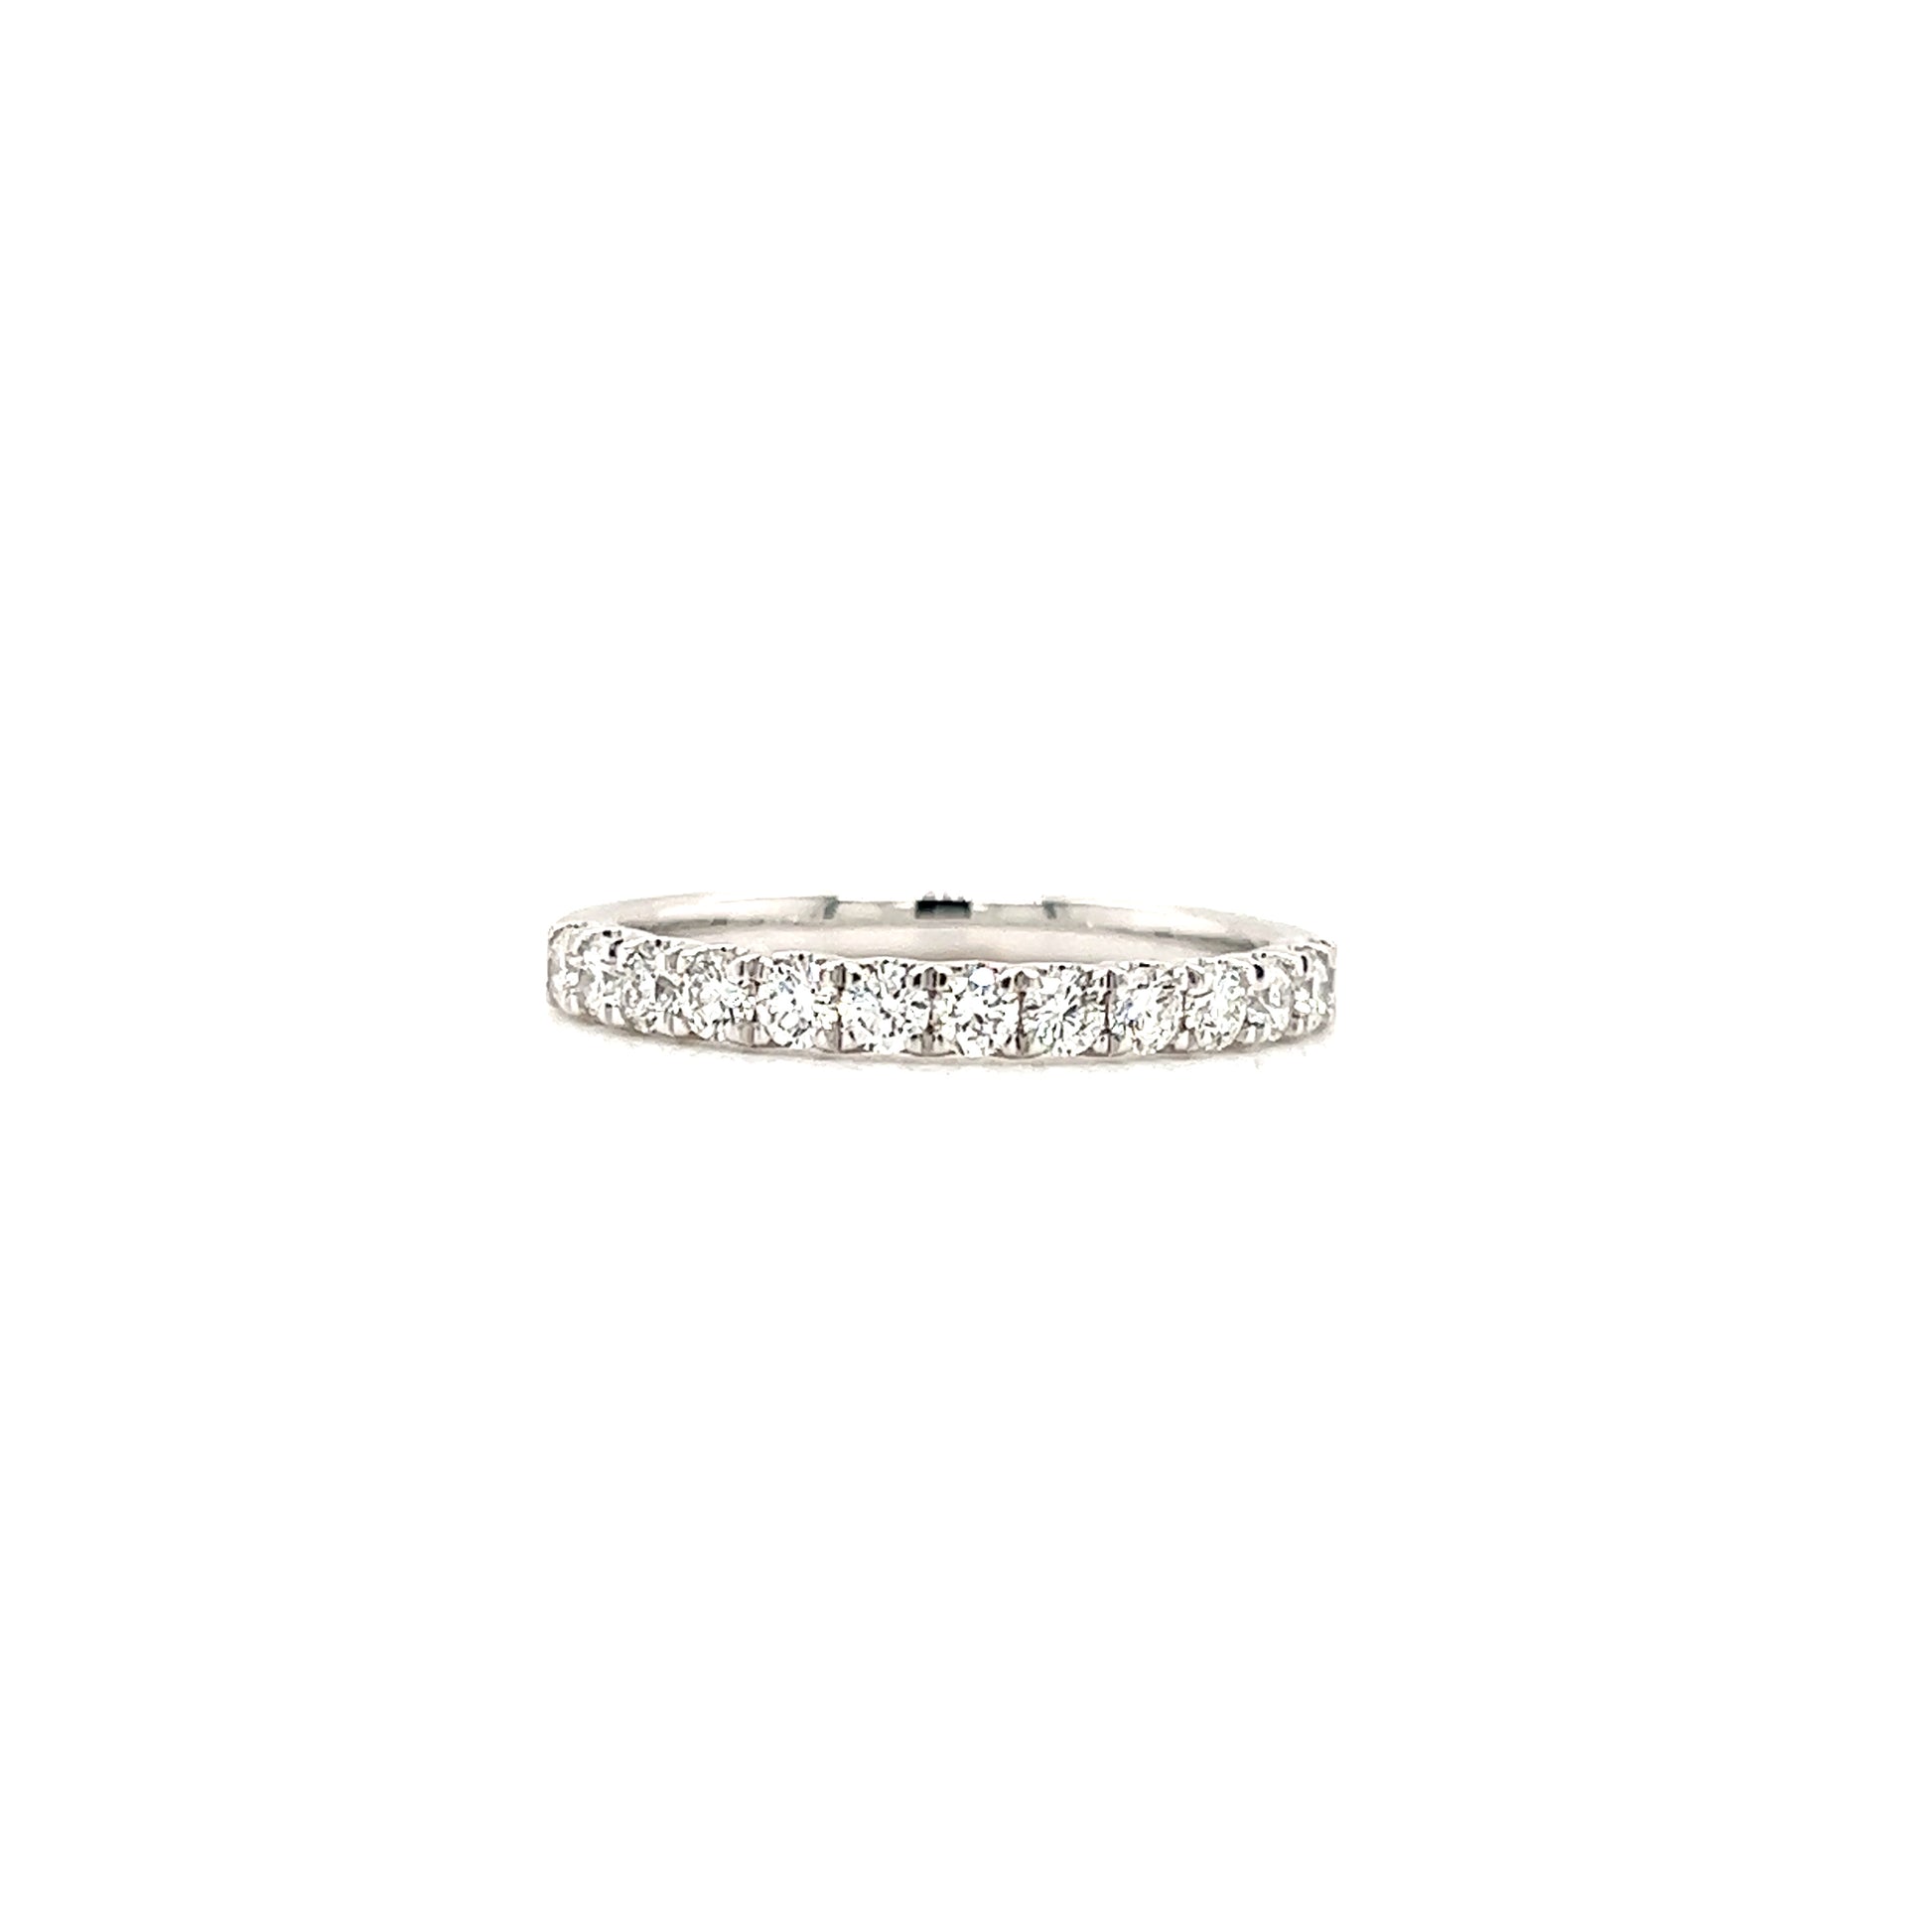 Diamond Ring with 0.51ctw of Diamonds in 14K White Gold Front View